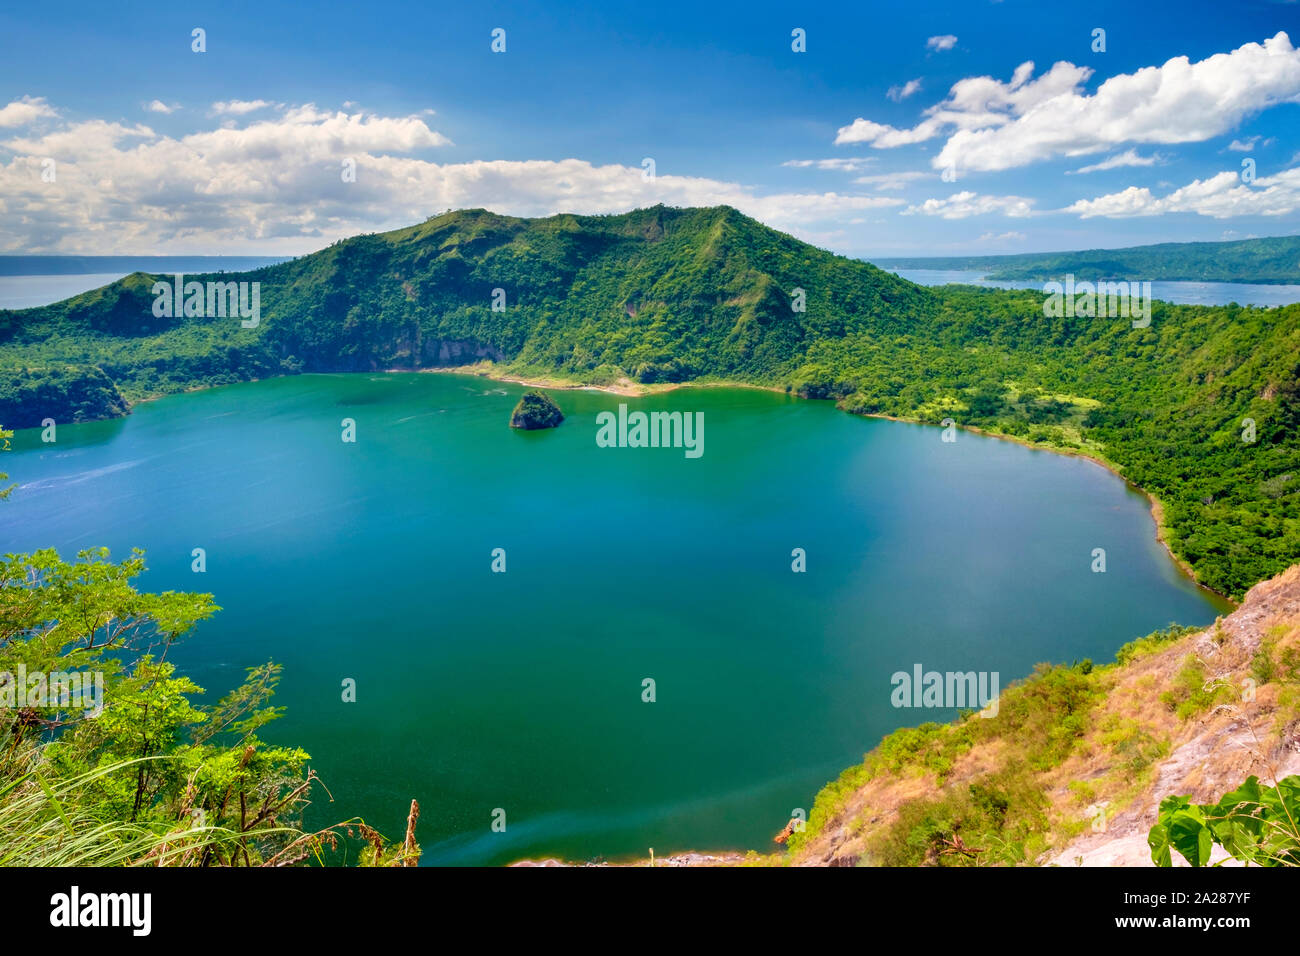 Crater lake of Taal Volcano on Taal Volcano Island, Talisay, Batangas Province, Philippines Stock Photo